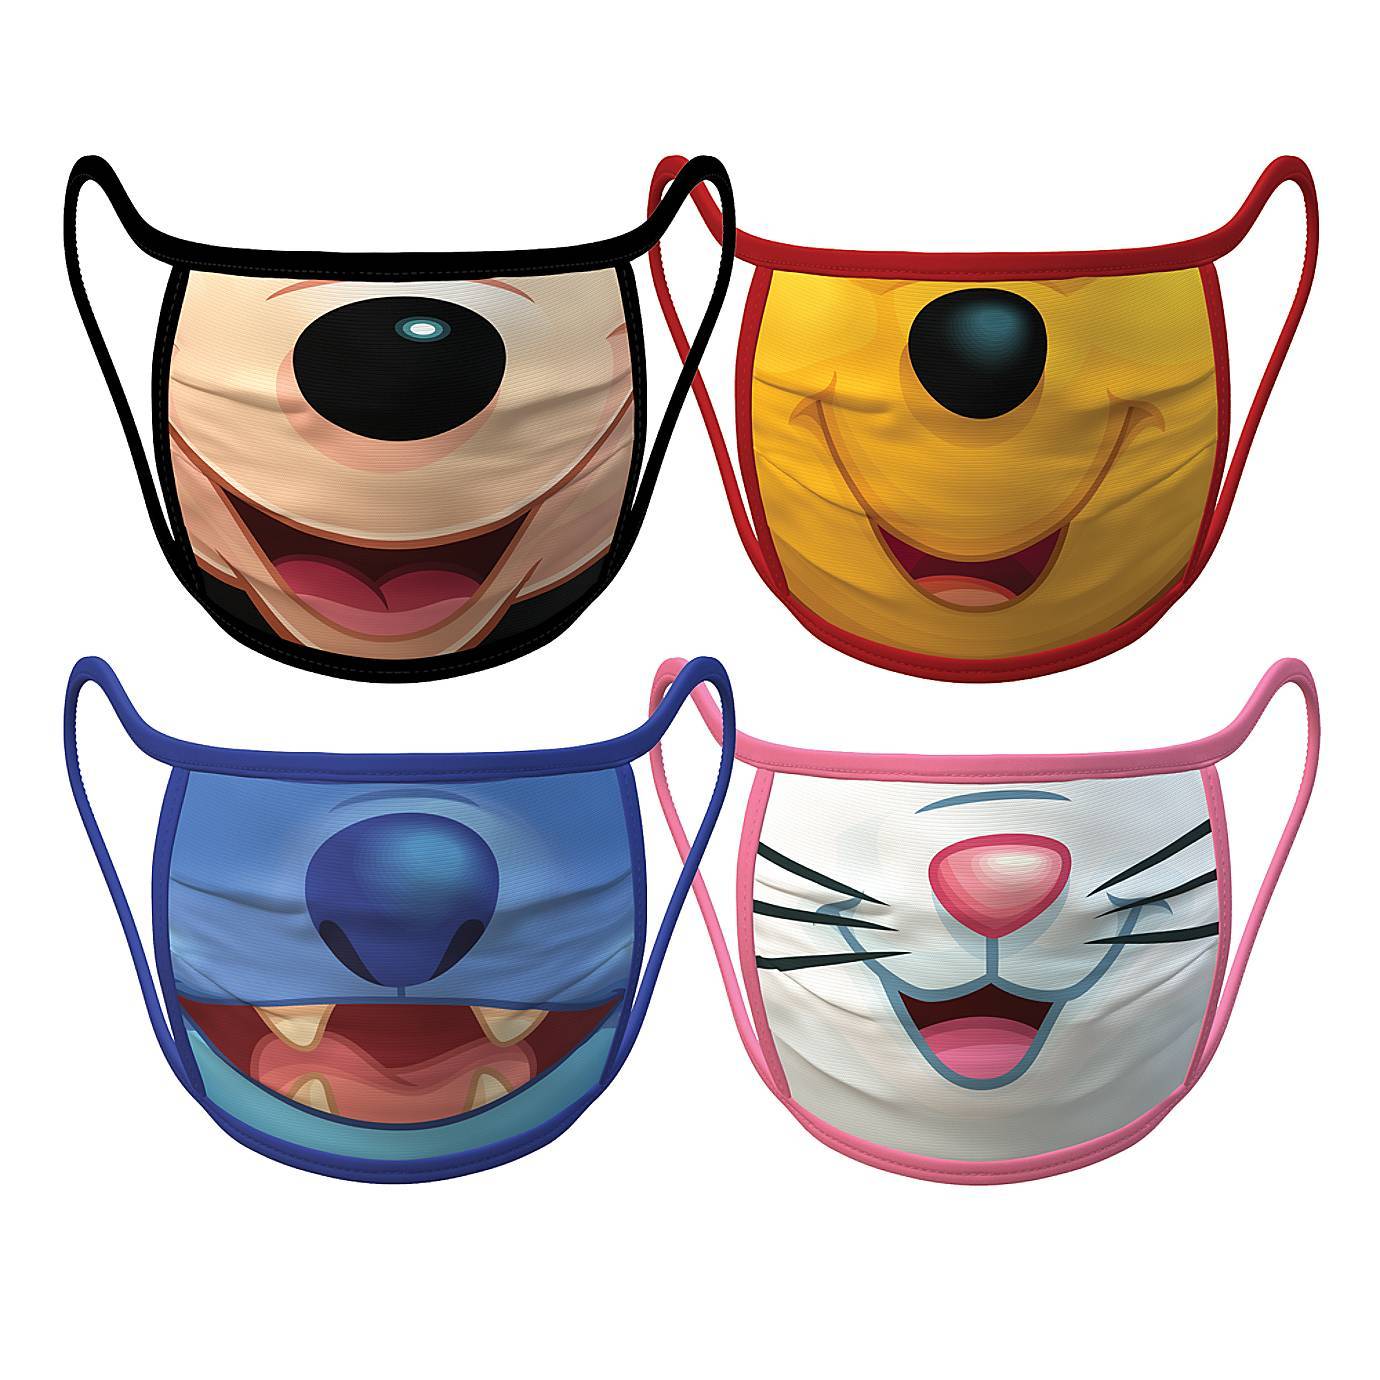 Disney begins selling cloth face masks featuring Disney characters